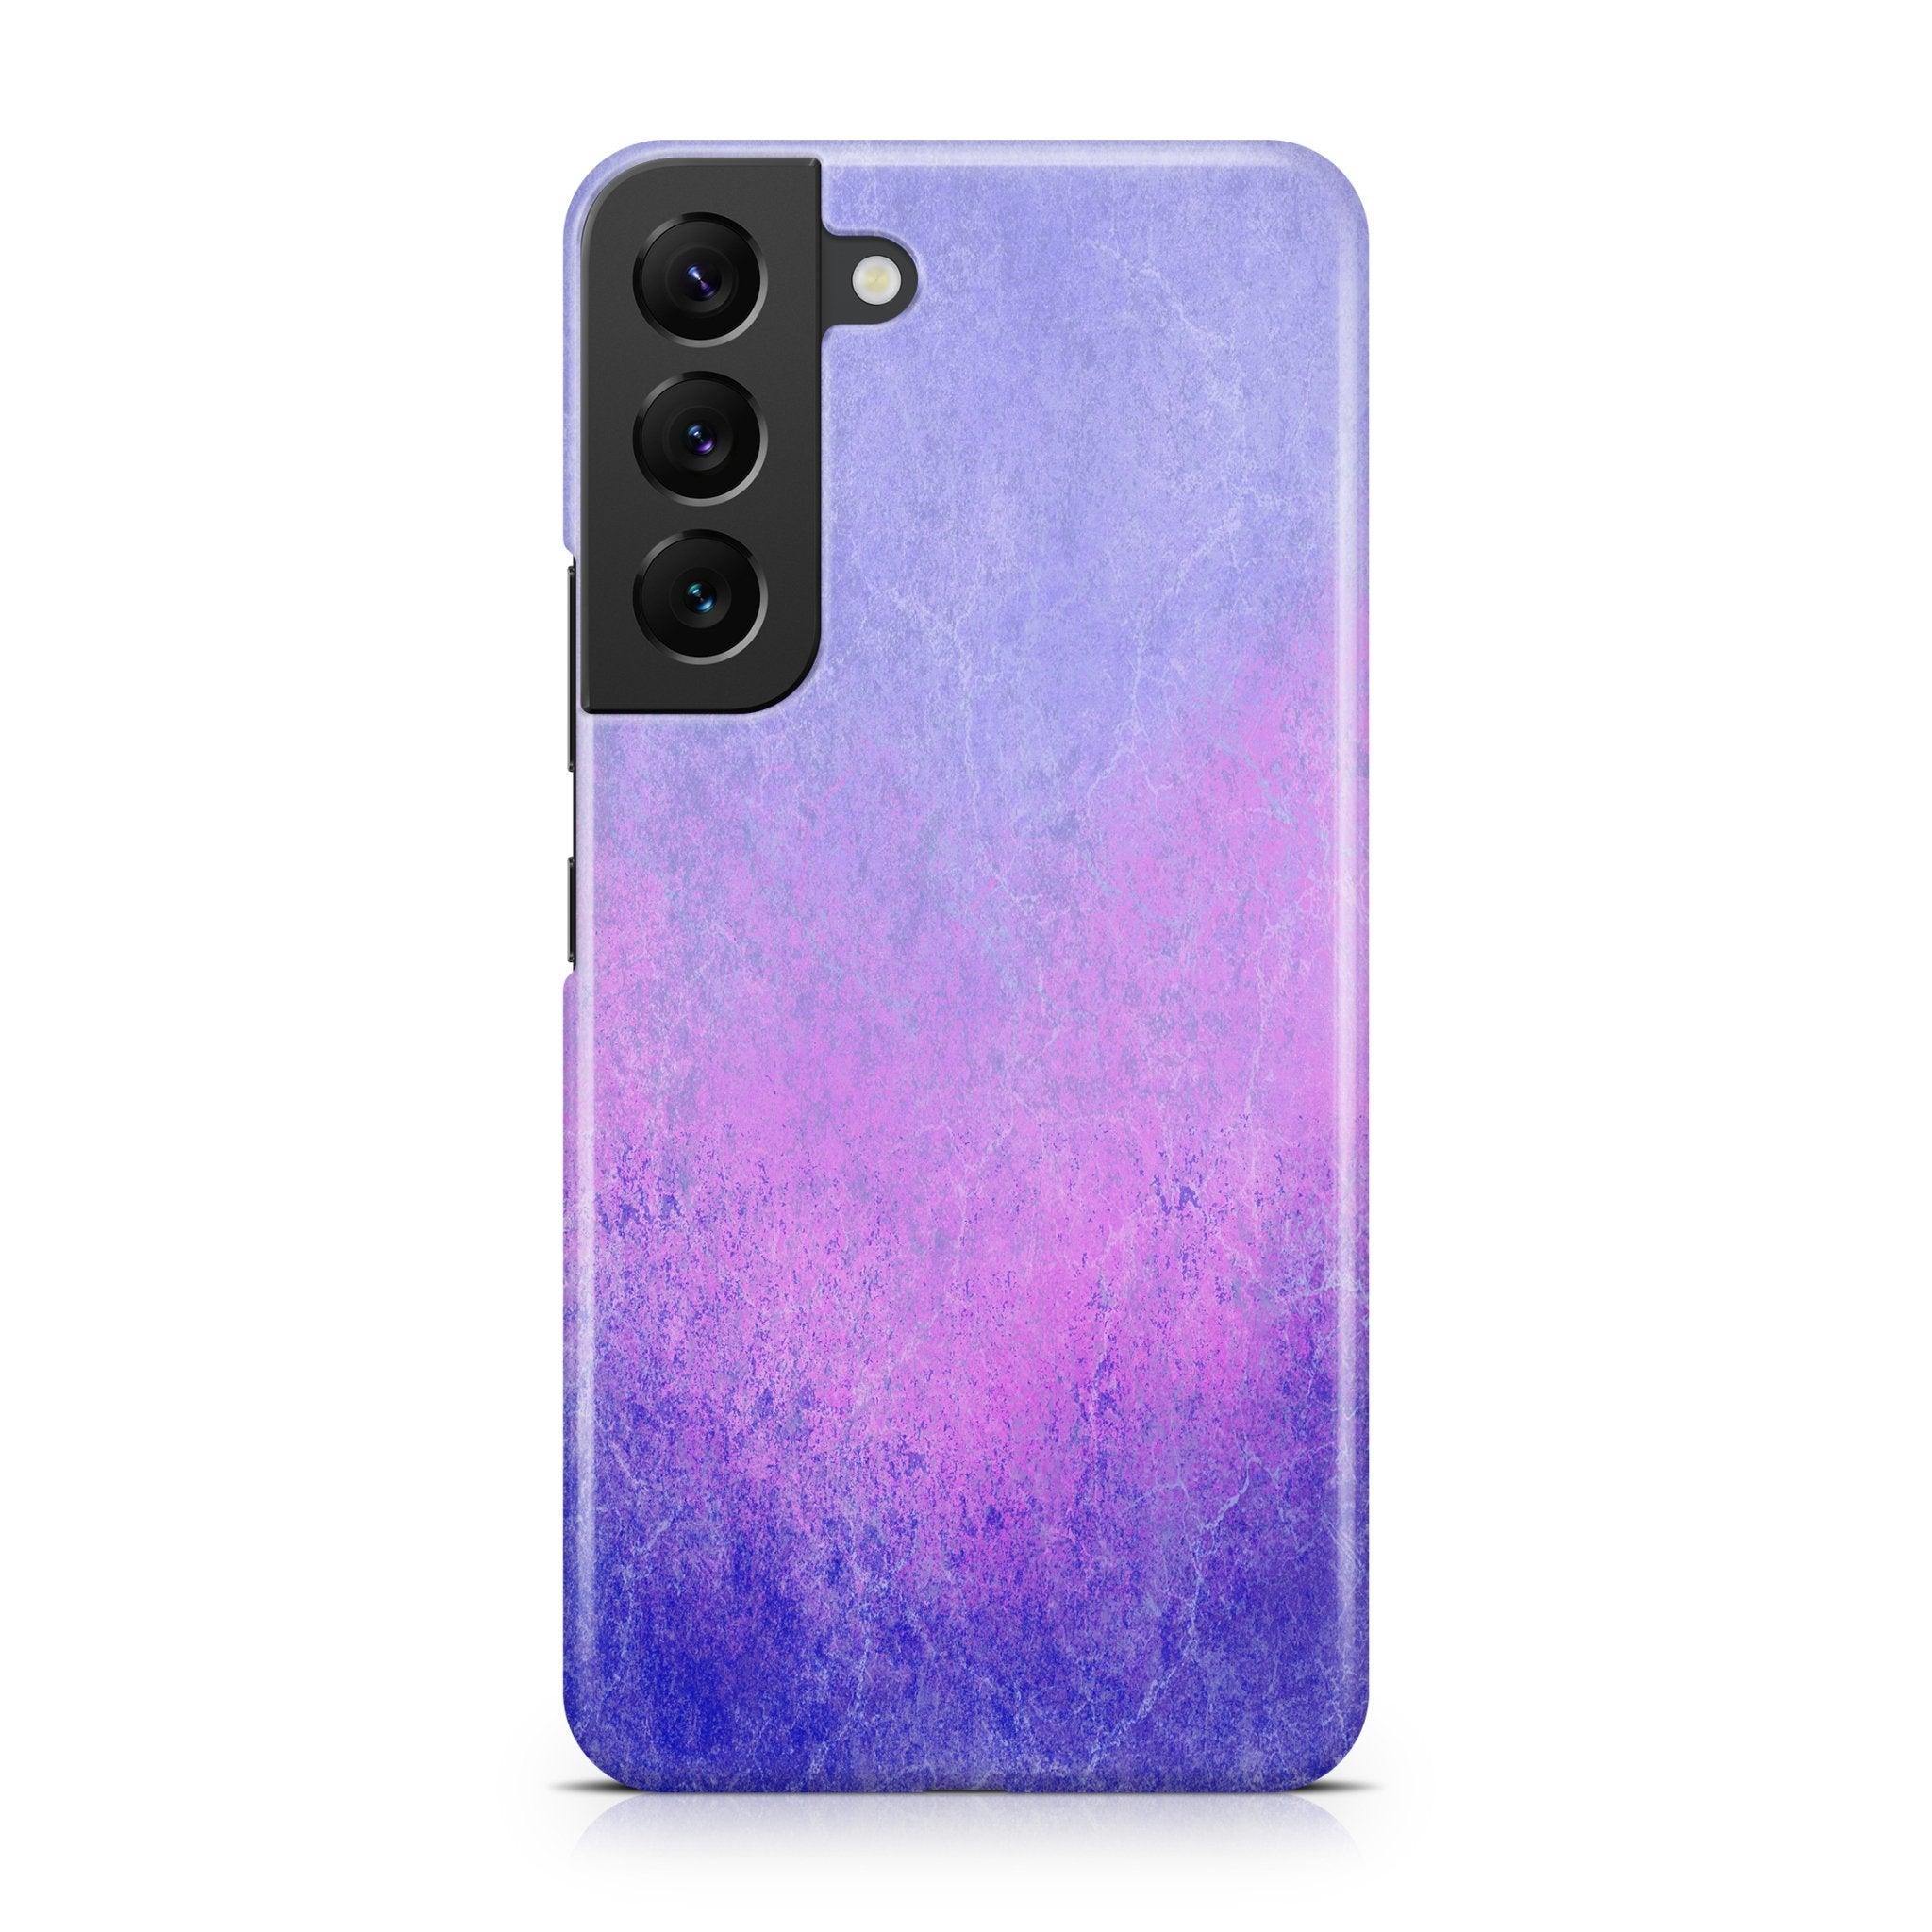 Fracture Lilac - Samsung phone case designs by CaseSwagger